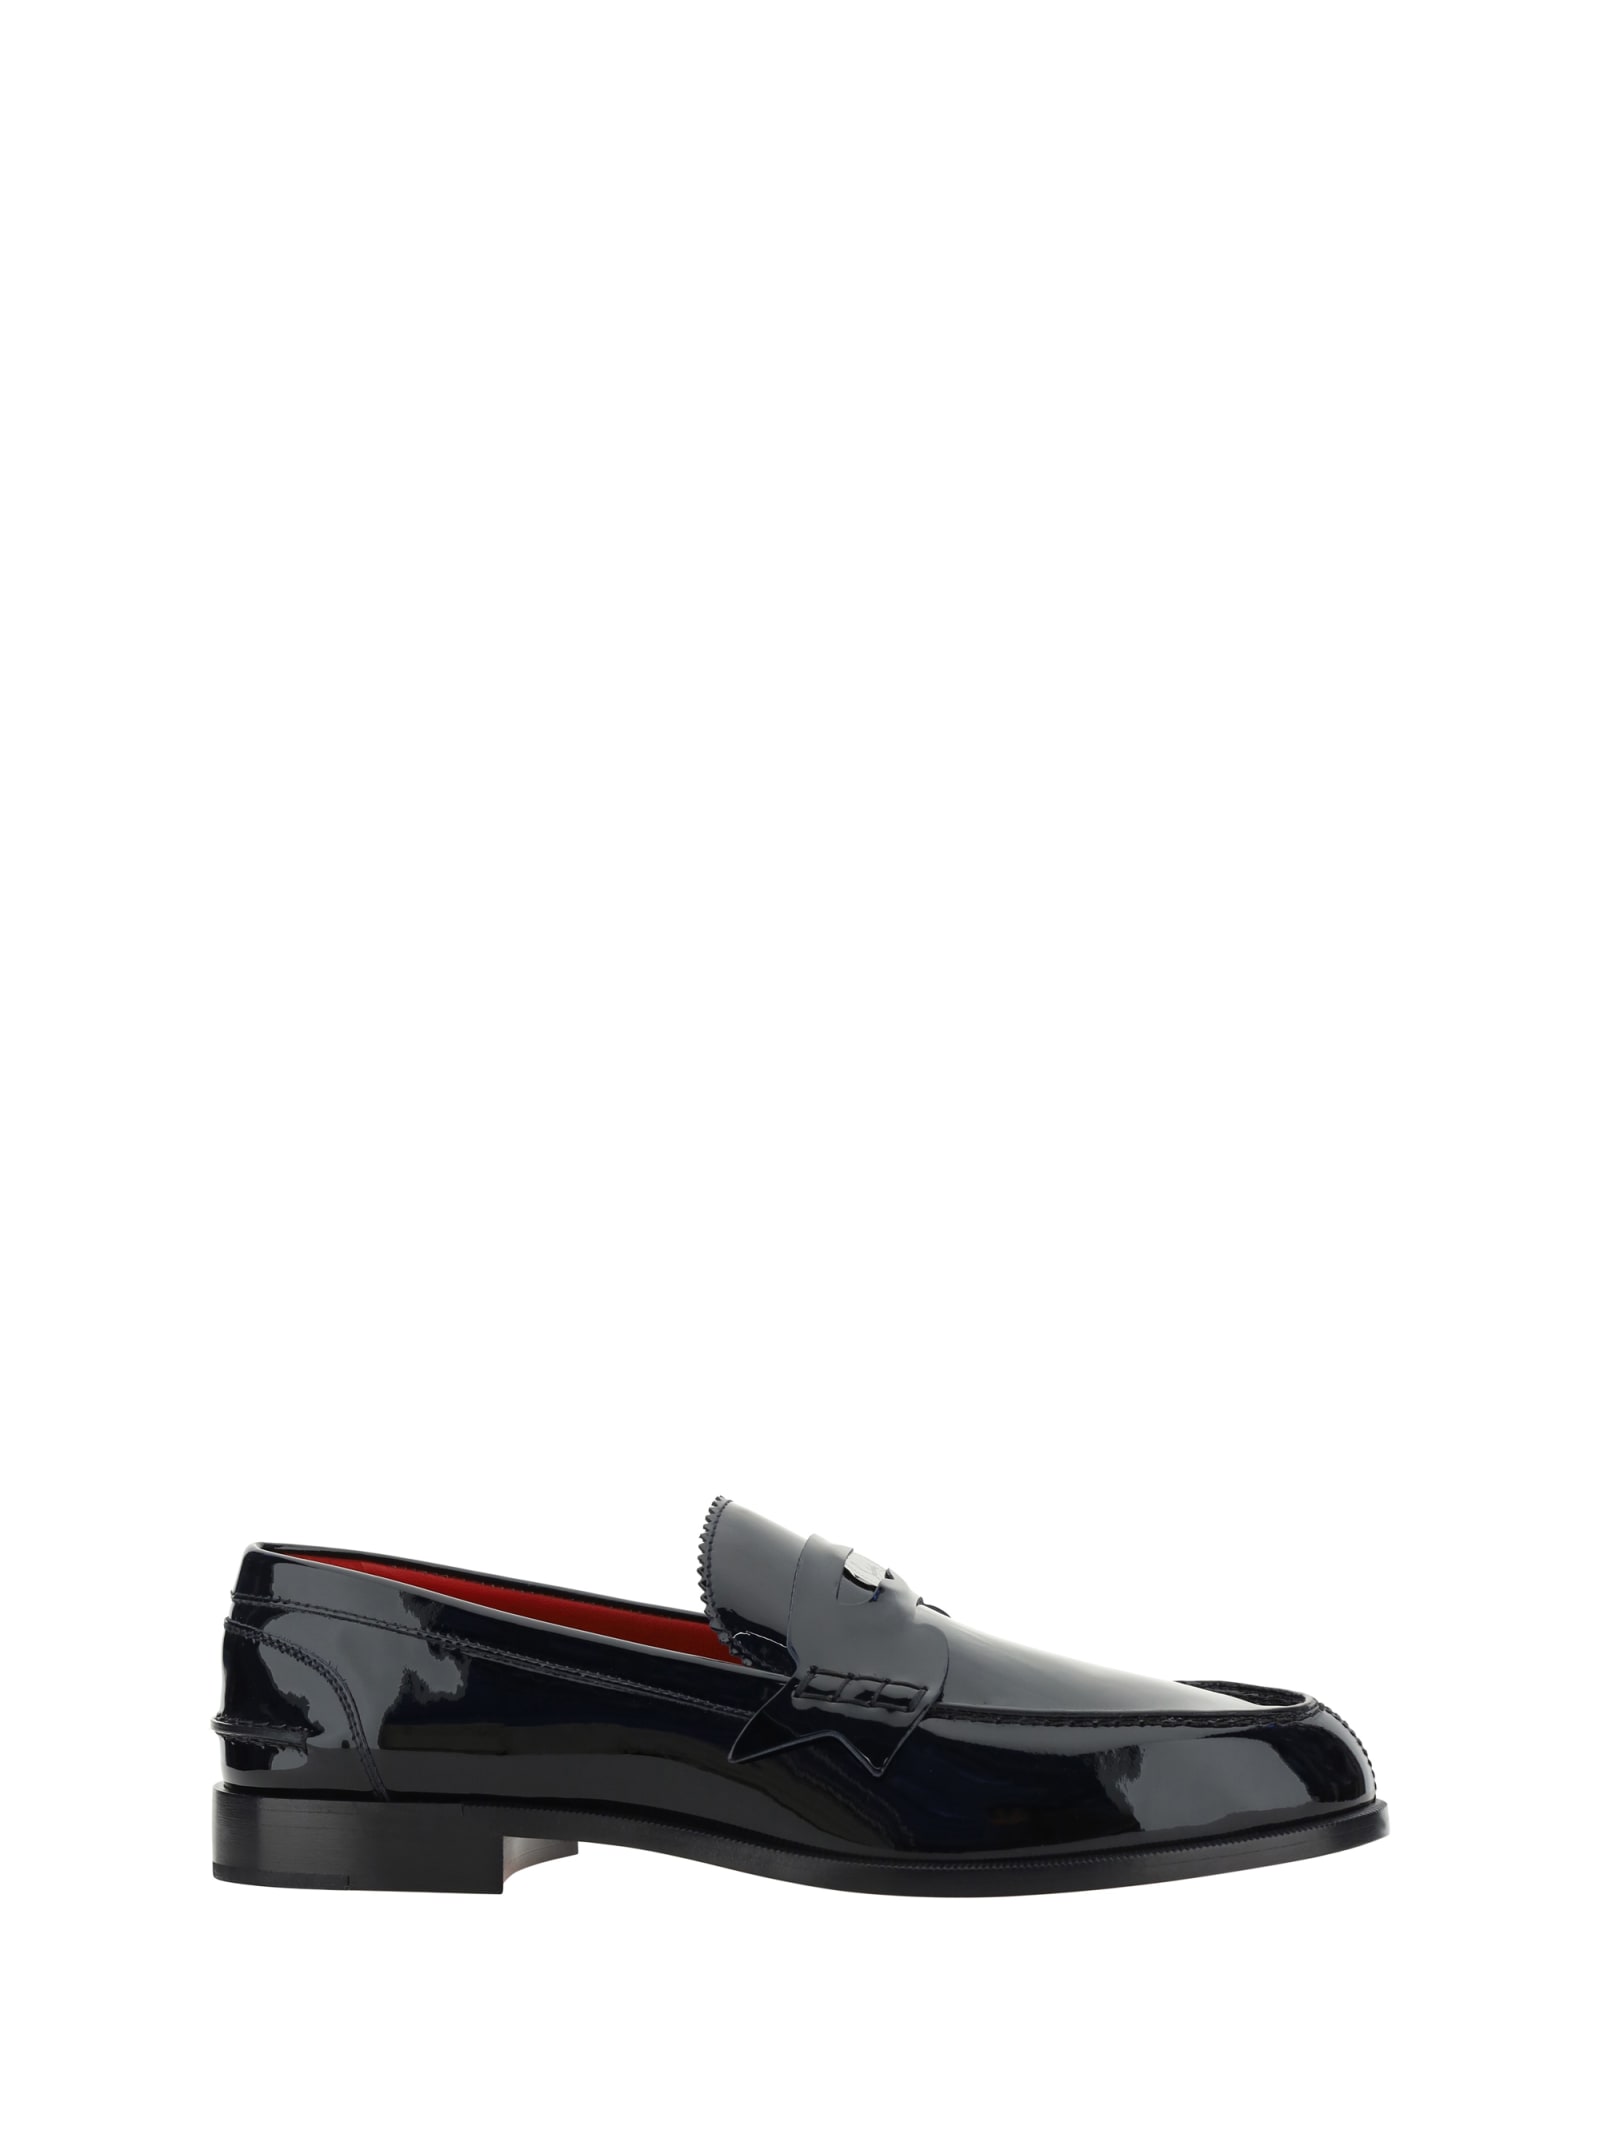 CHRISTIAN LOUBOUTIN PENNY LOAFERS